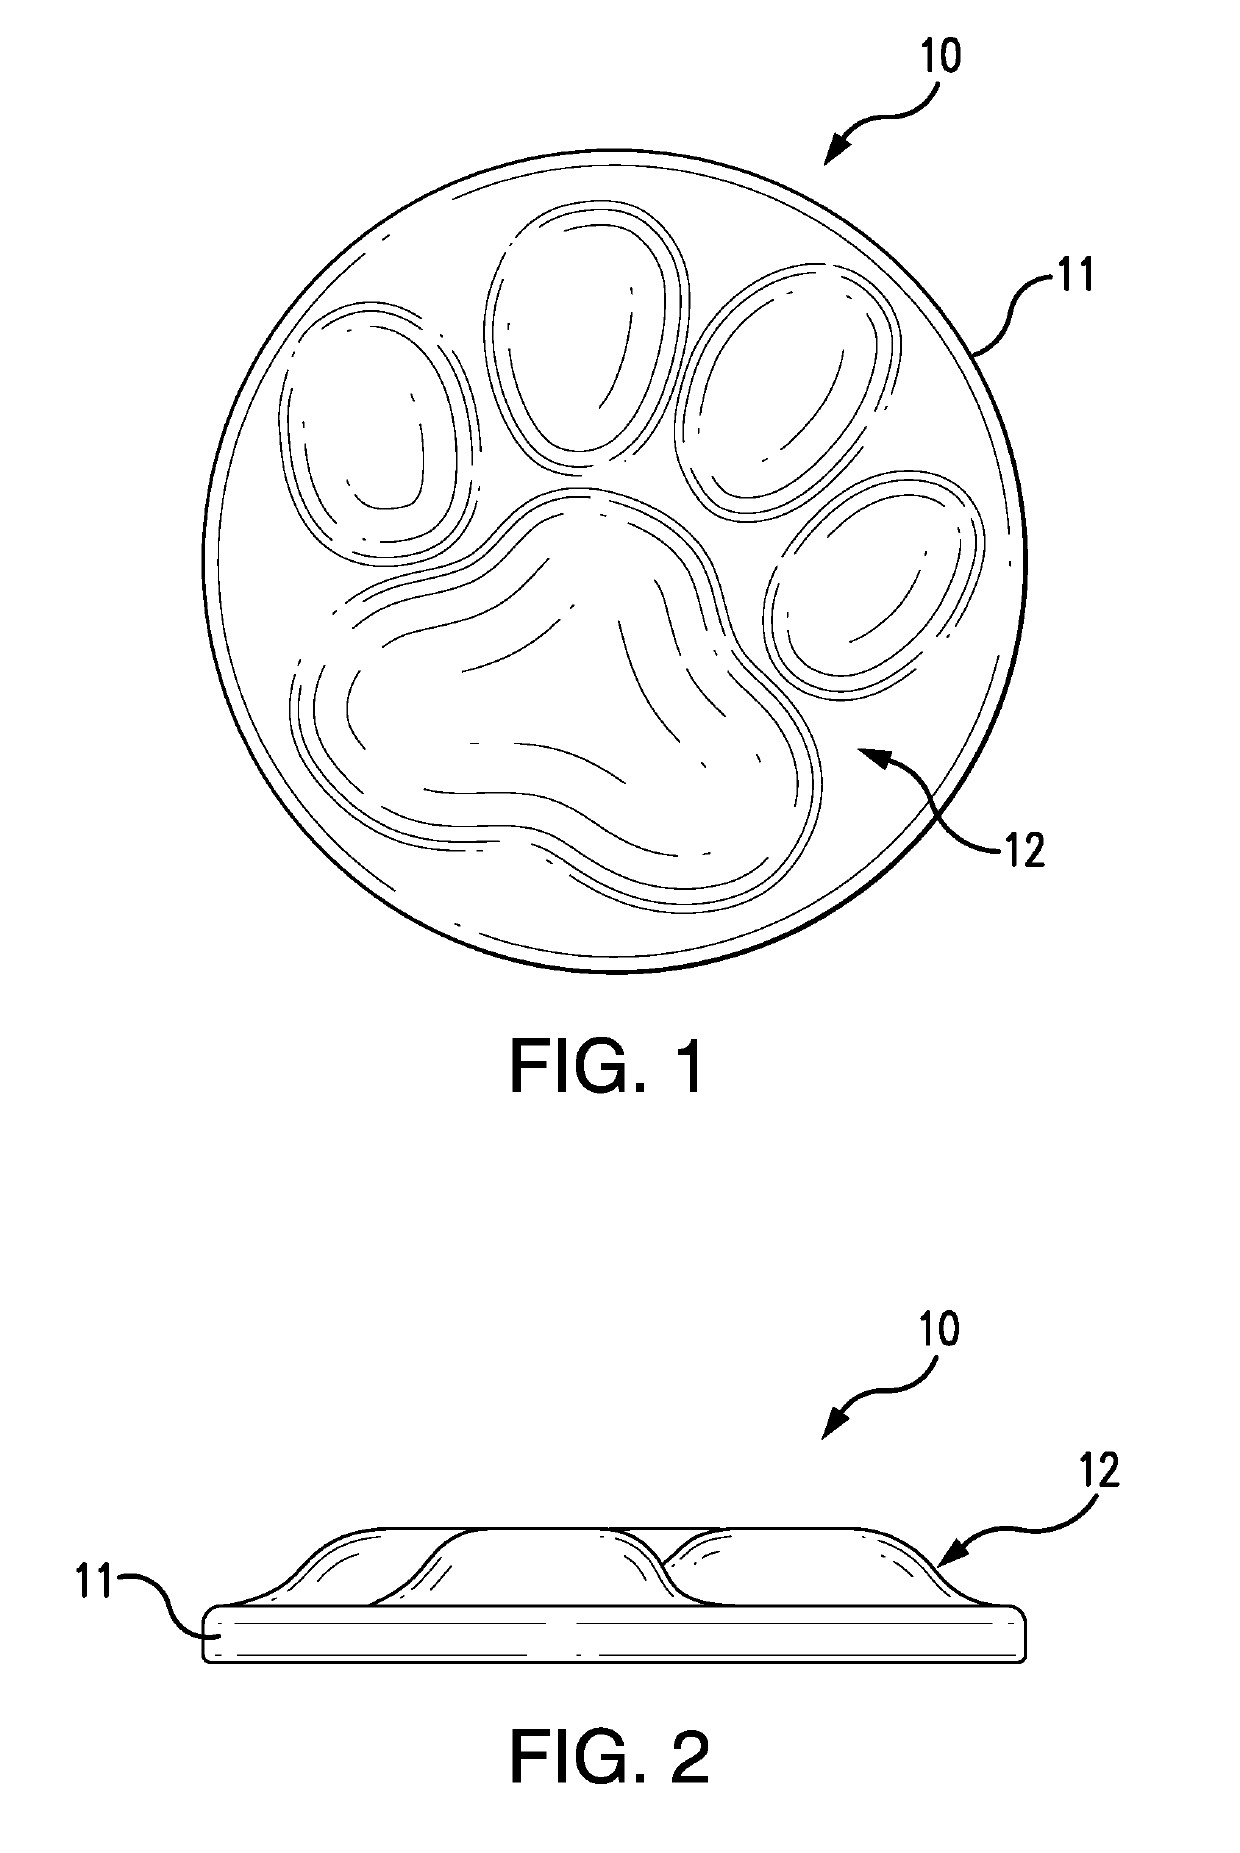 Device and method for removing fur and hair from fabrics